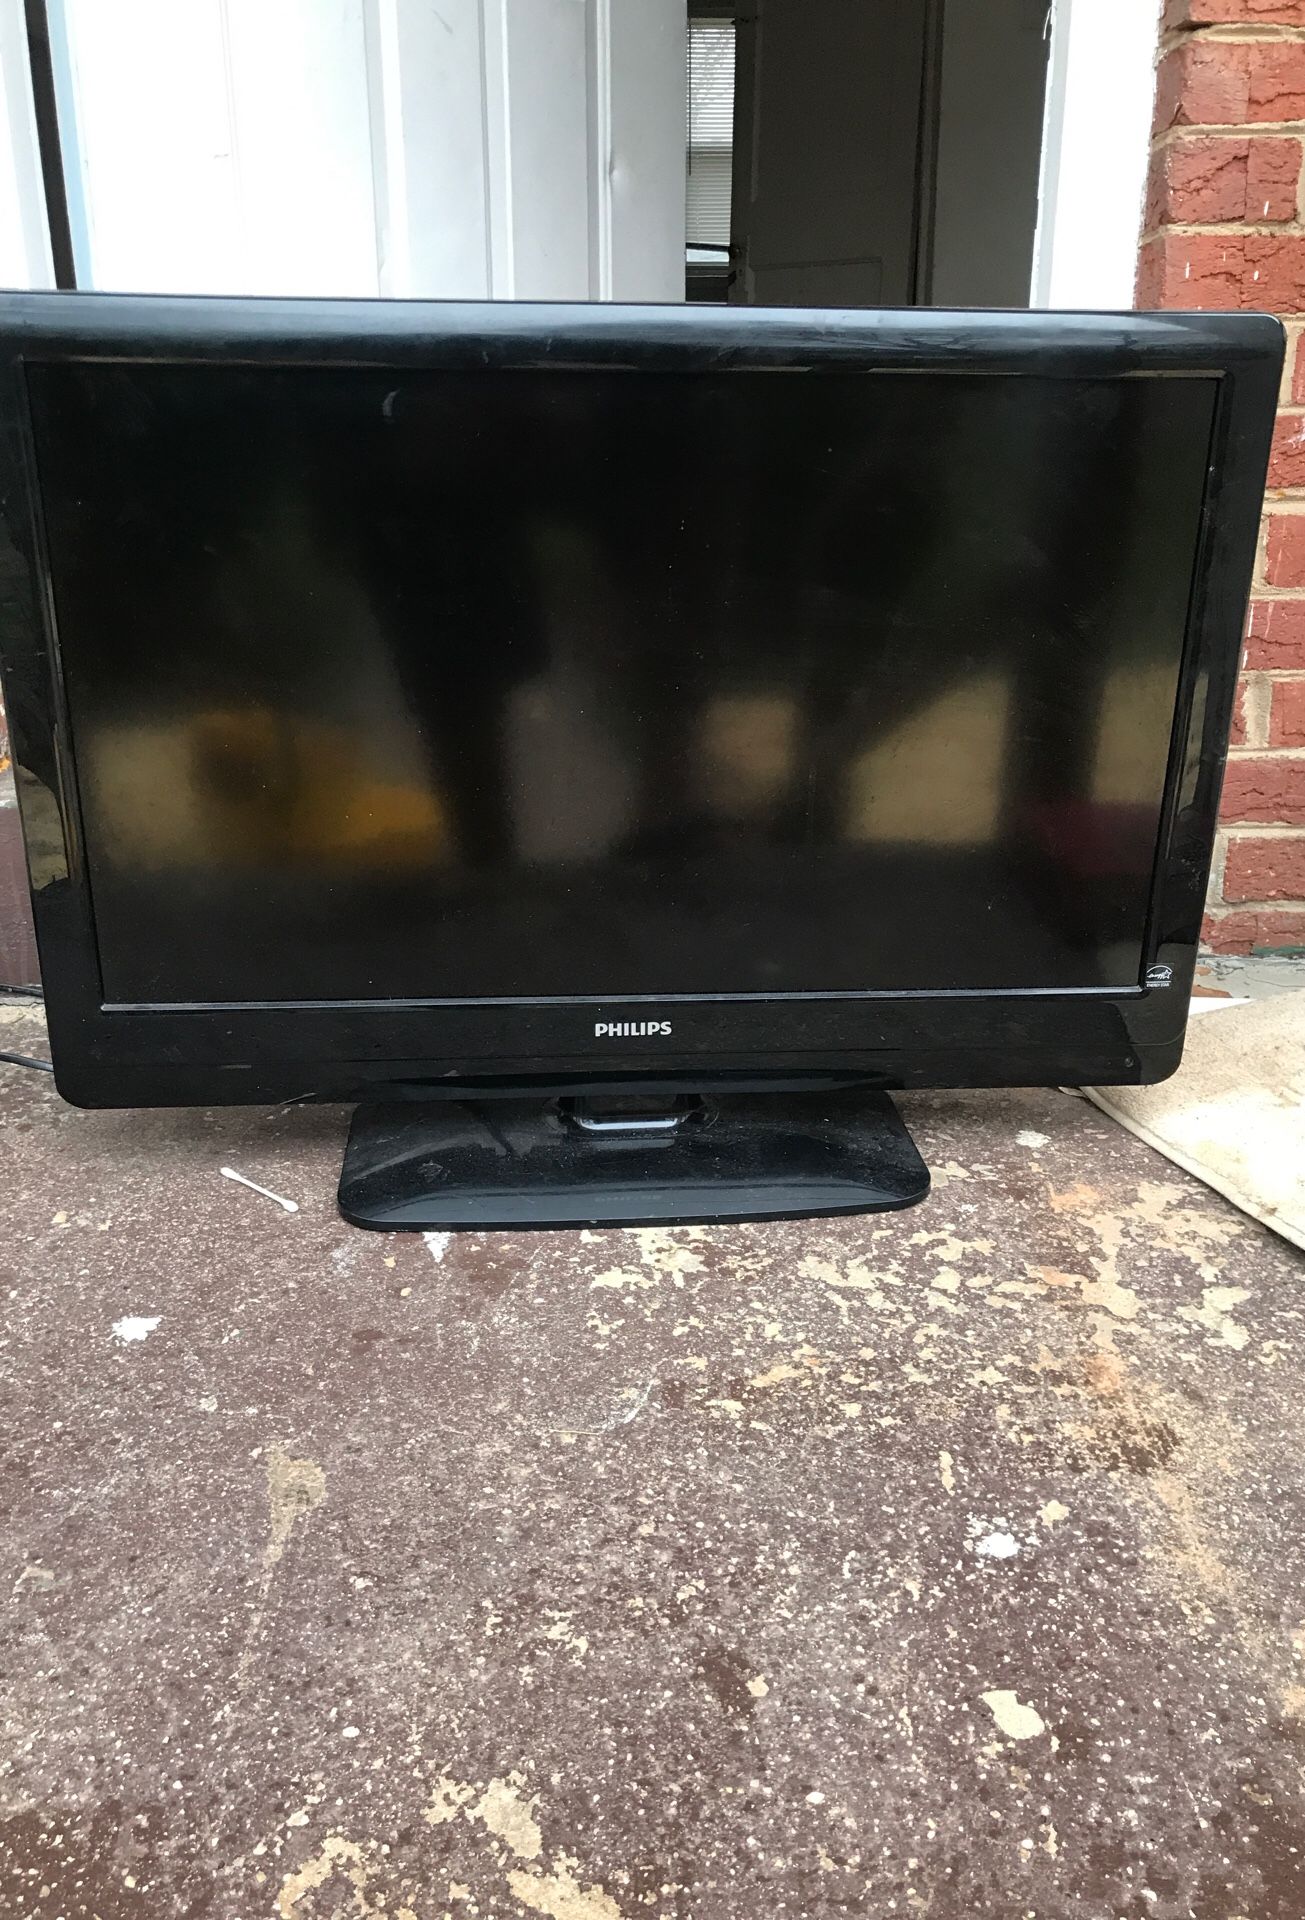 Used 32 inch philips Tv (works great)